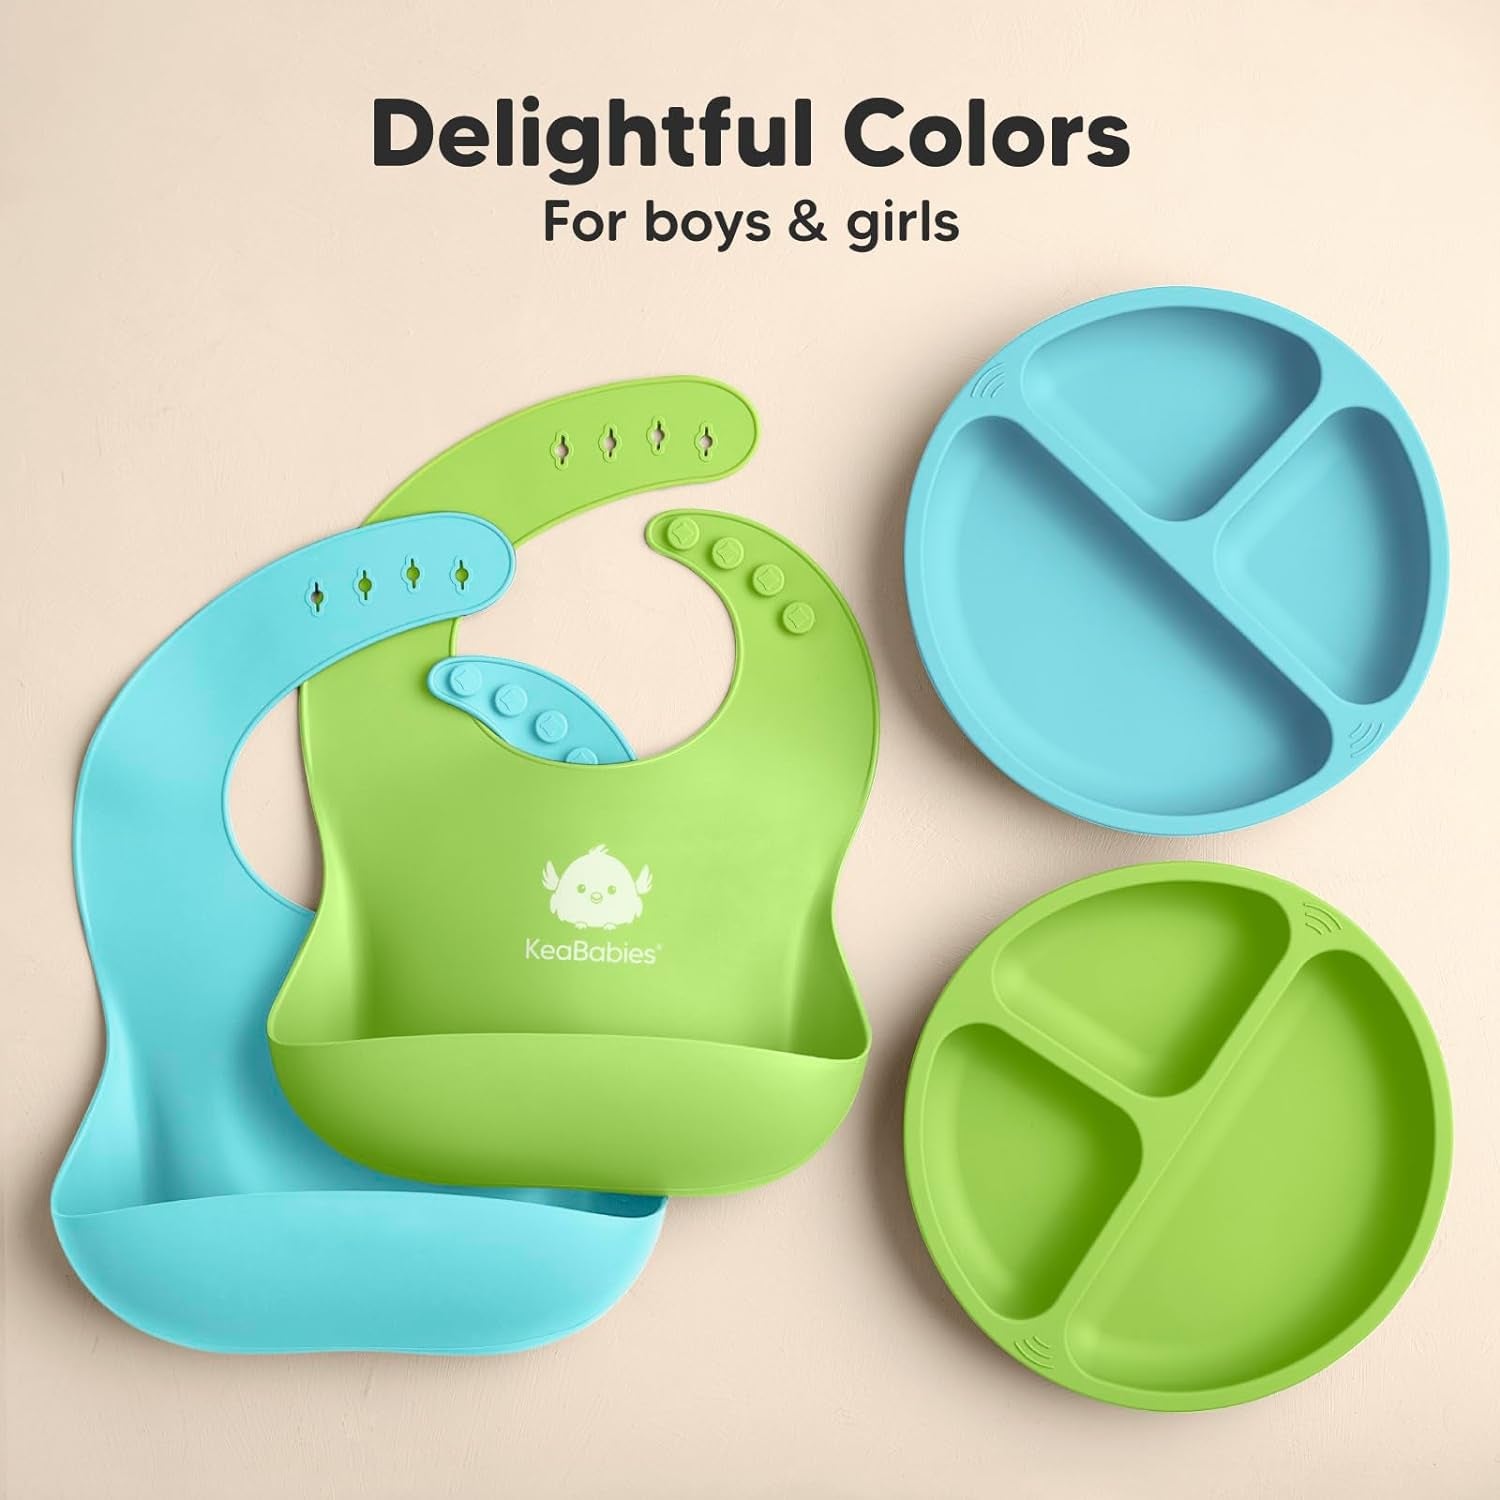 2-Pack Silicone Bibs for Babies, Silicone Baby Bibs for Eating, Food-Grade Pure Silicone Bib, Toddler Bibs, Waterproof Bibs, Feeding Bibs, Silicon Bibs for Toddlers, Boys (Cloud Nine)